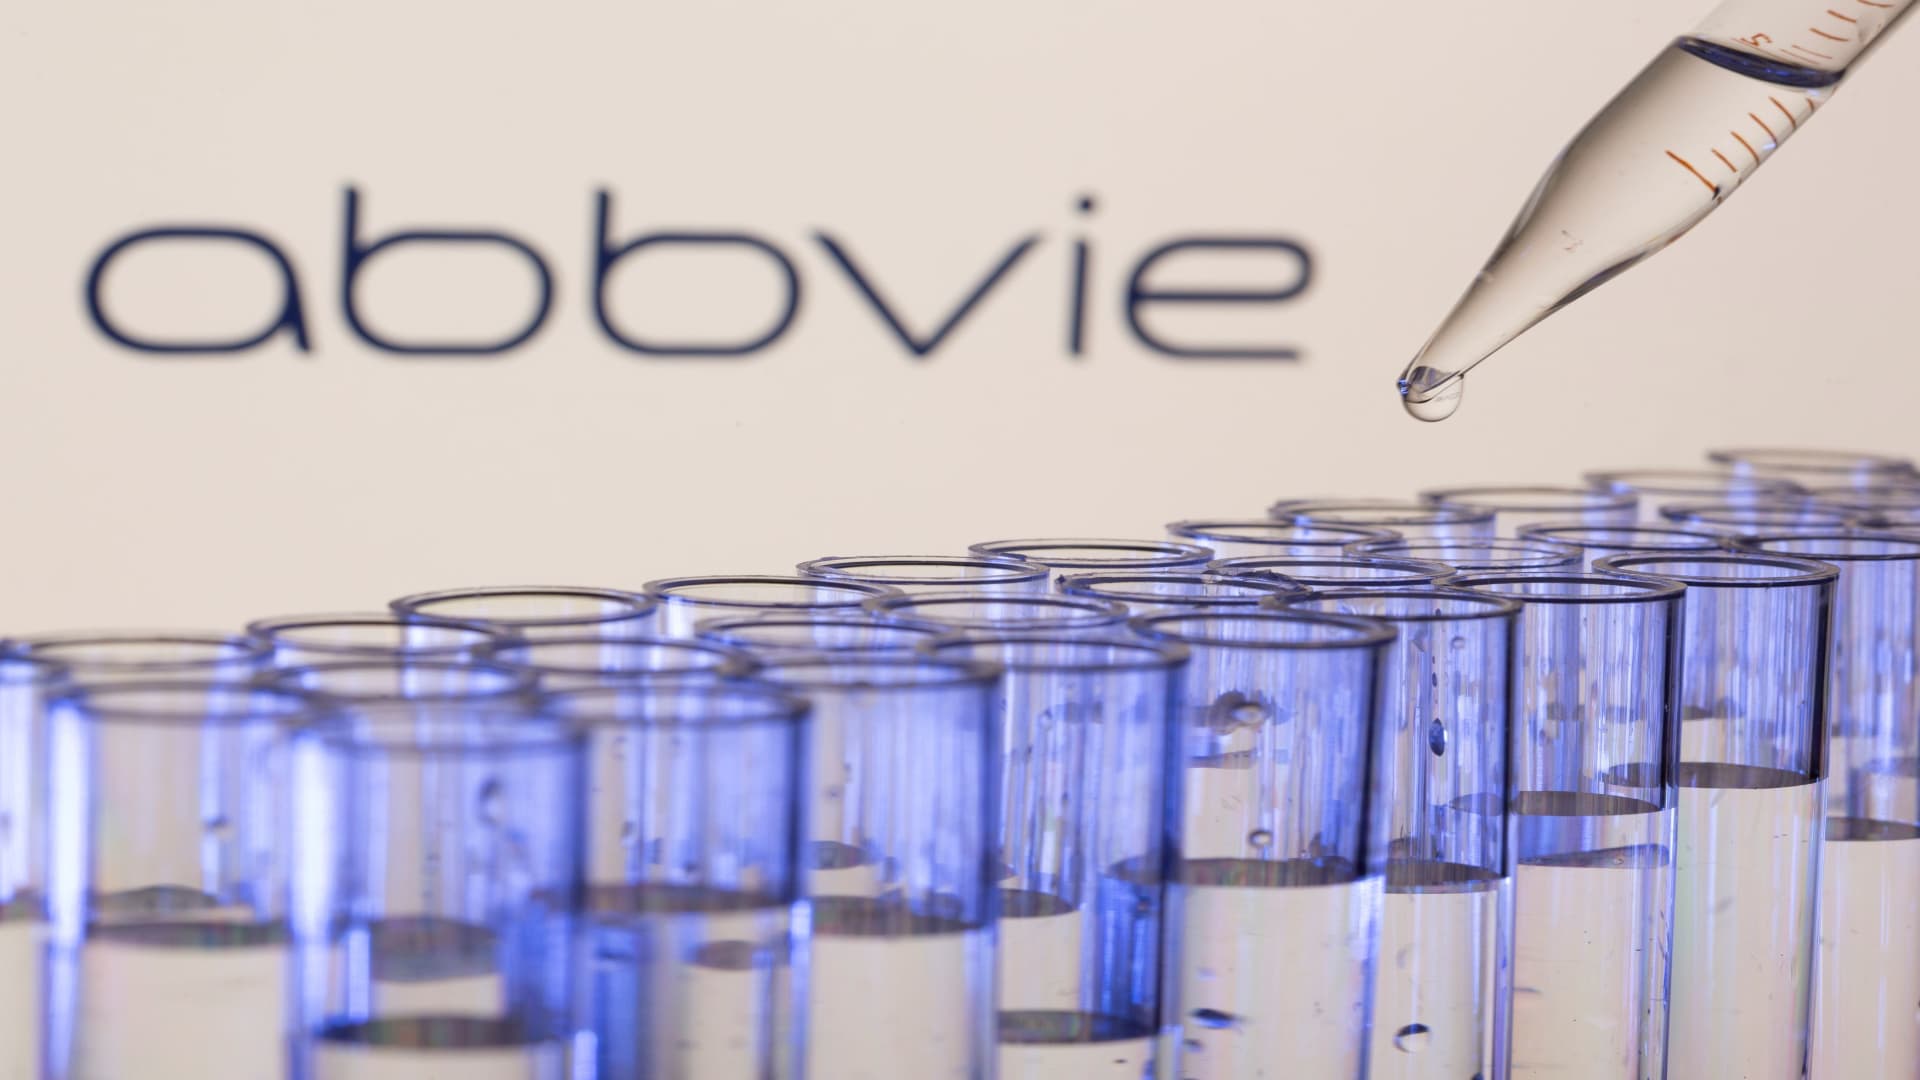 Biotech shares bounce on AbbVie deal to purchase most cancers drugmaker ImmunoGen for  billion